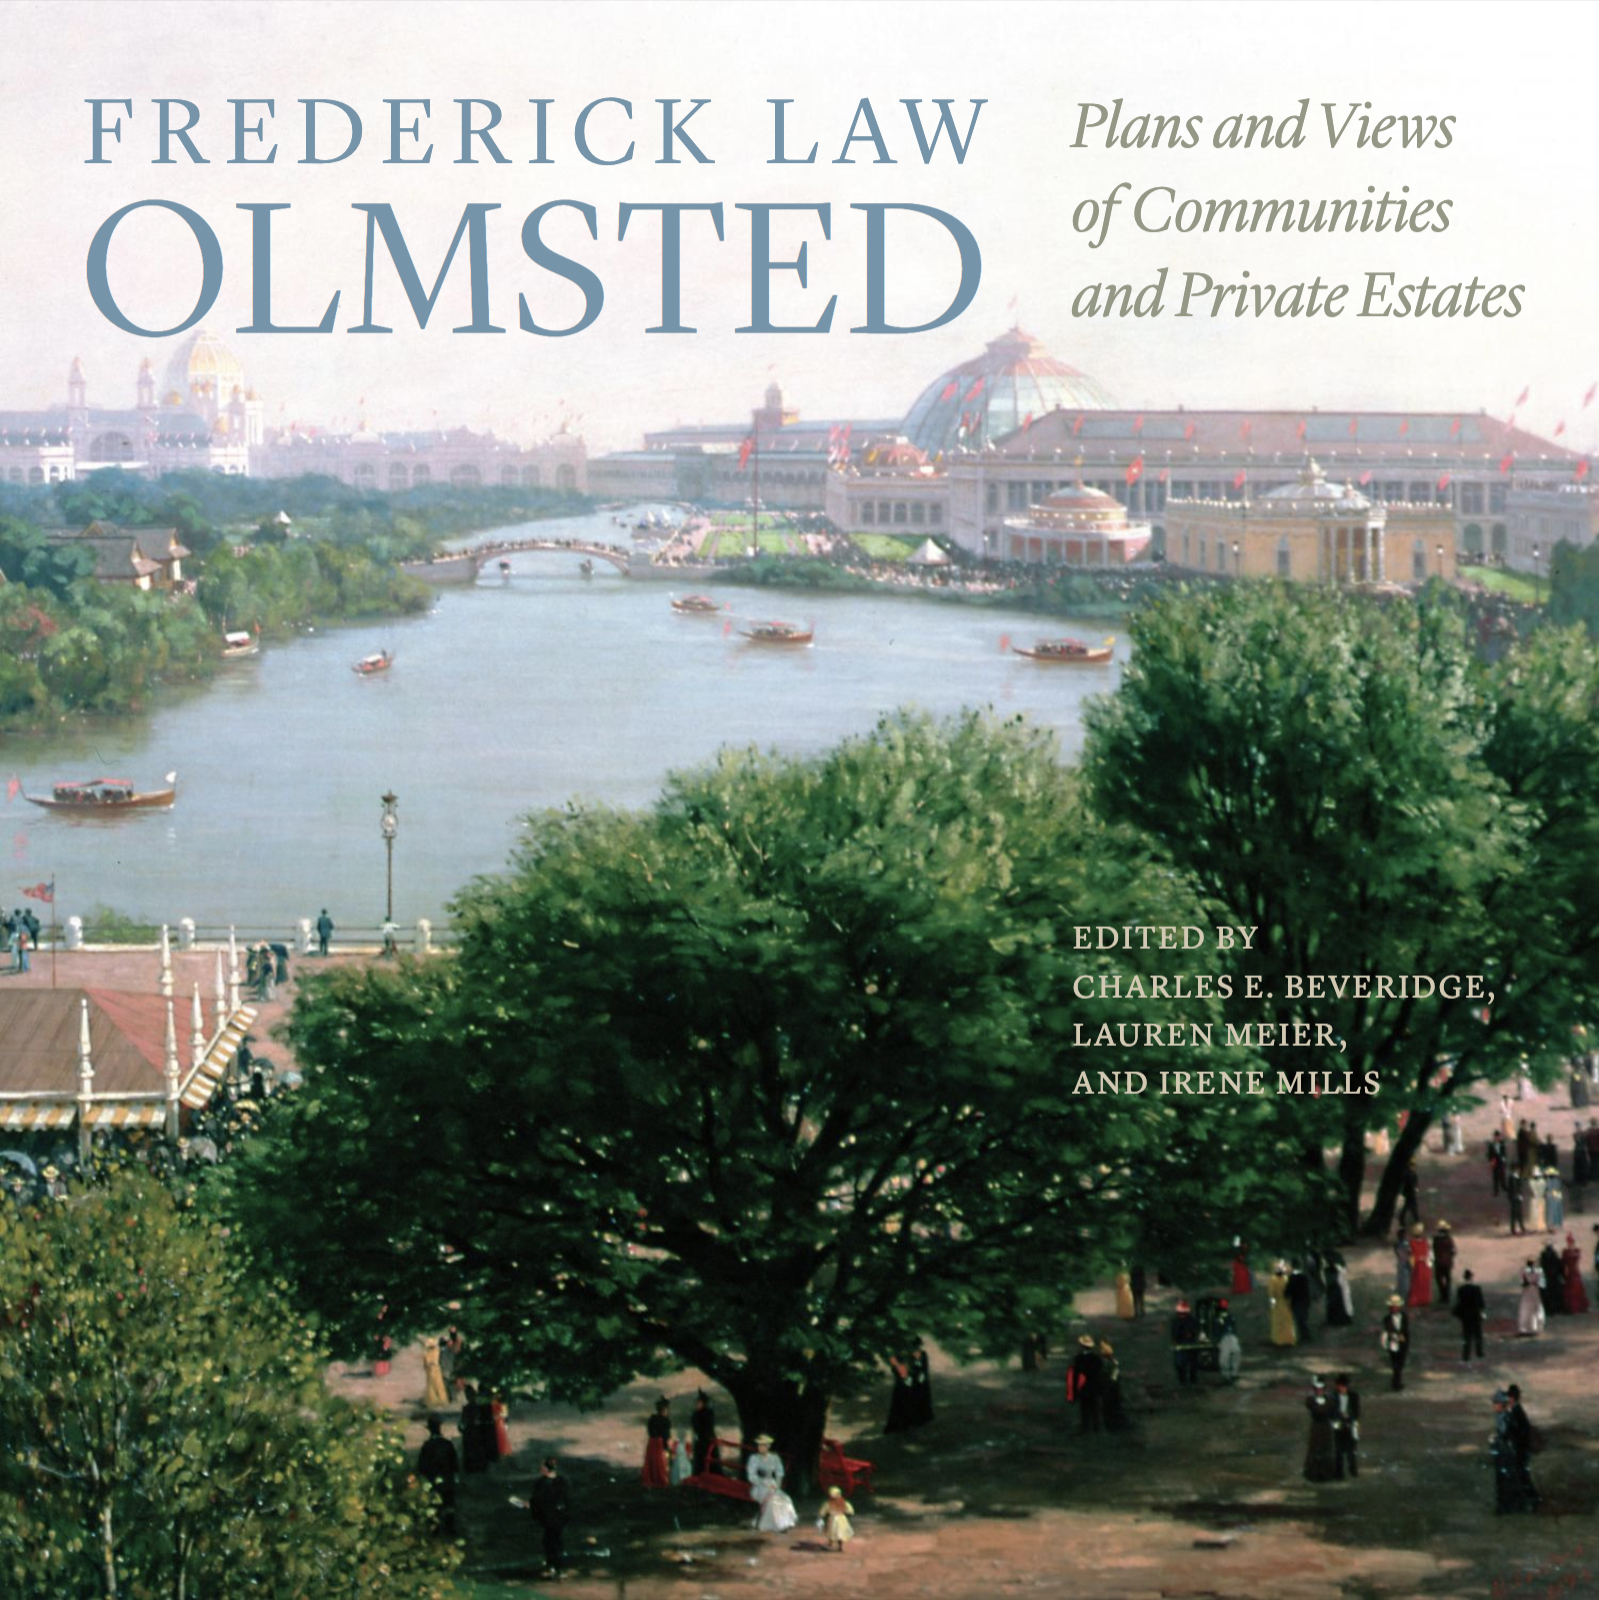 Frederick Law Olmsted: Plans and Views of Communities and Private Estates